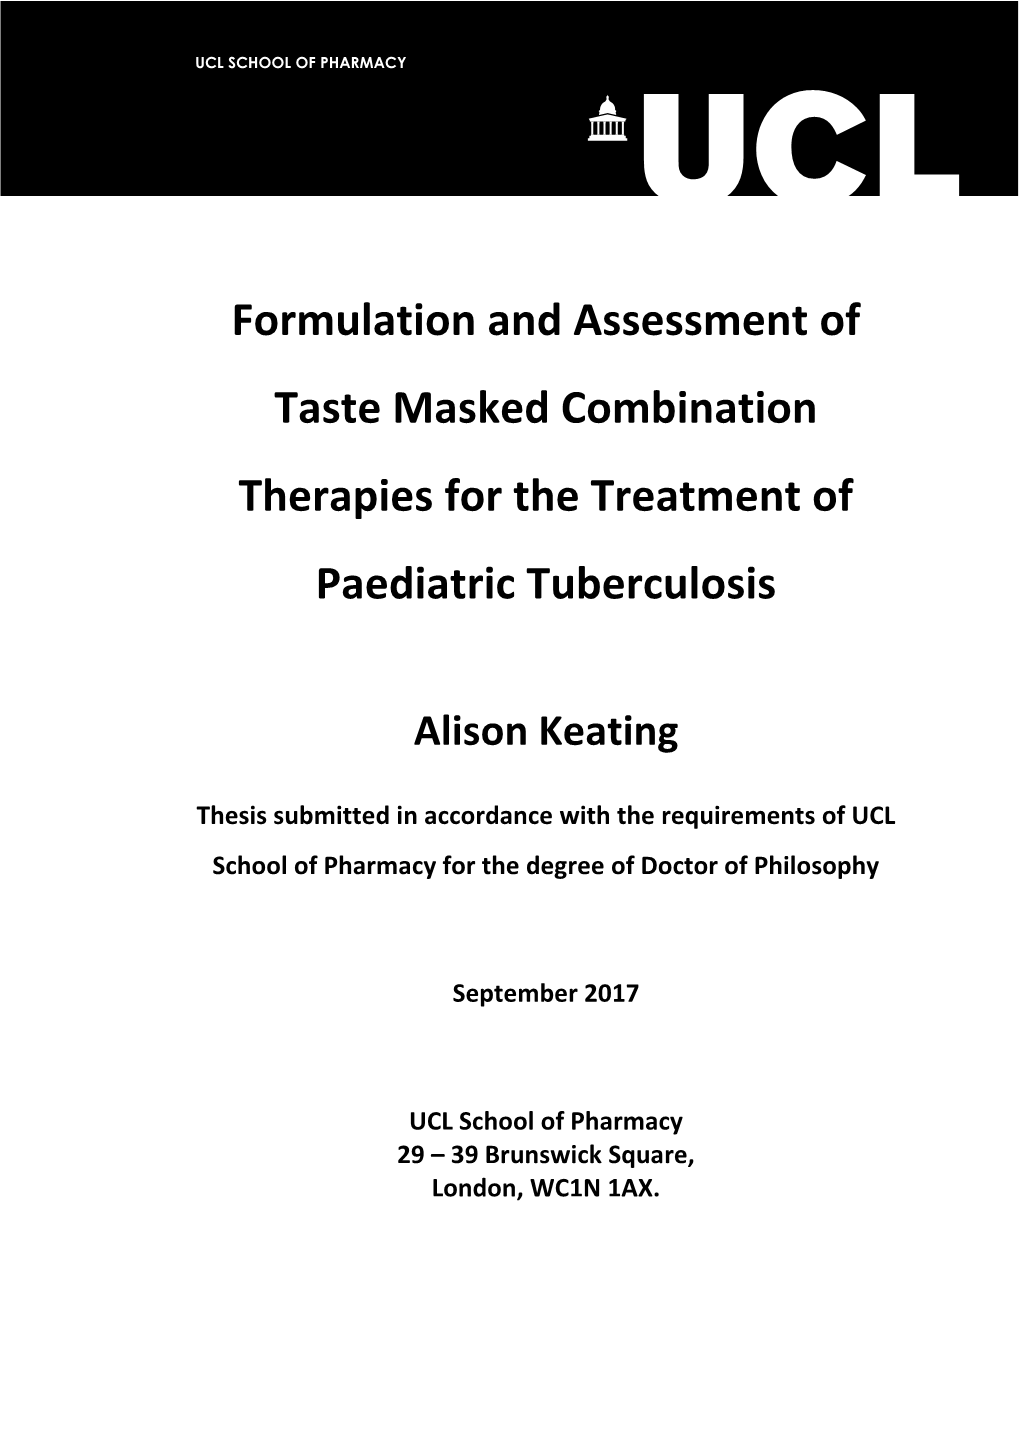 Formulation and Assessment of Taste Masked Combination Therapies for the Treatment of Paediatric Tuberculosis